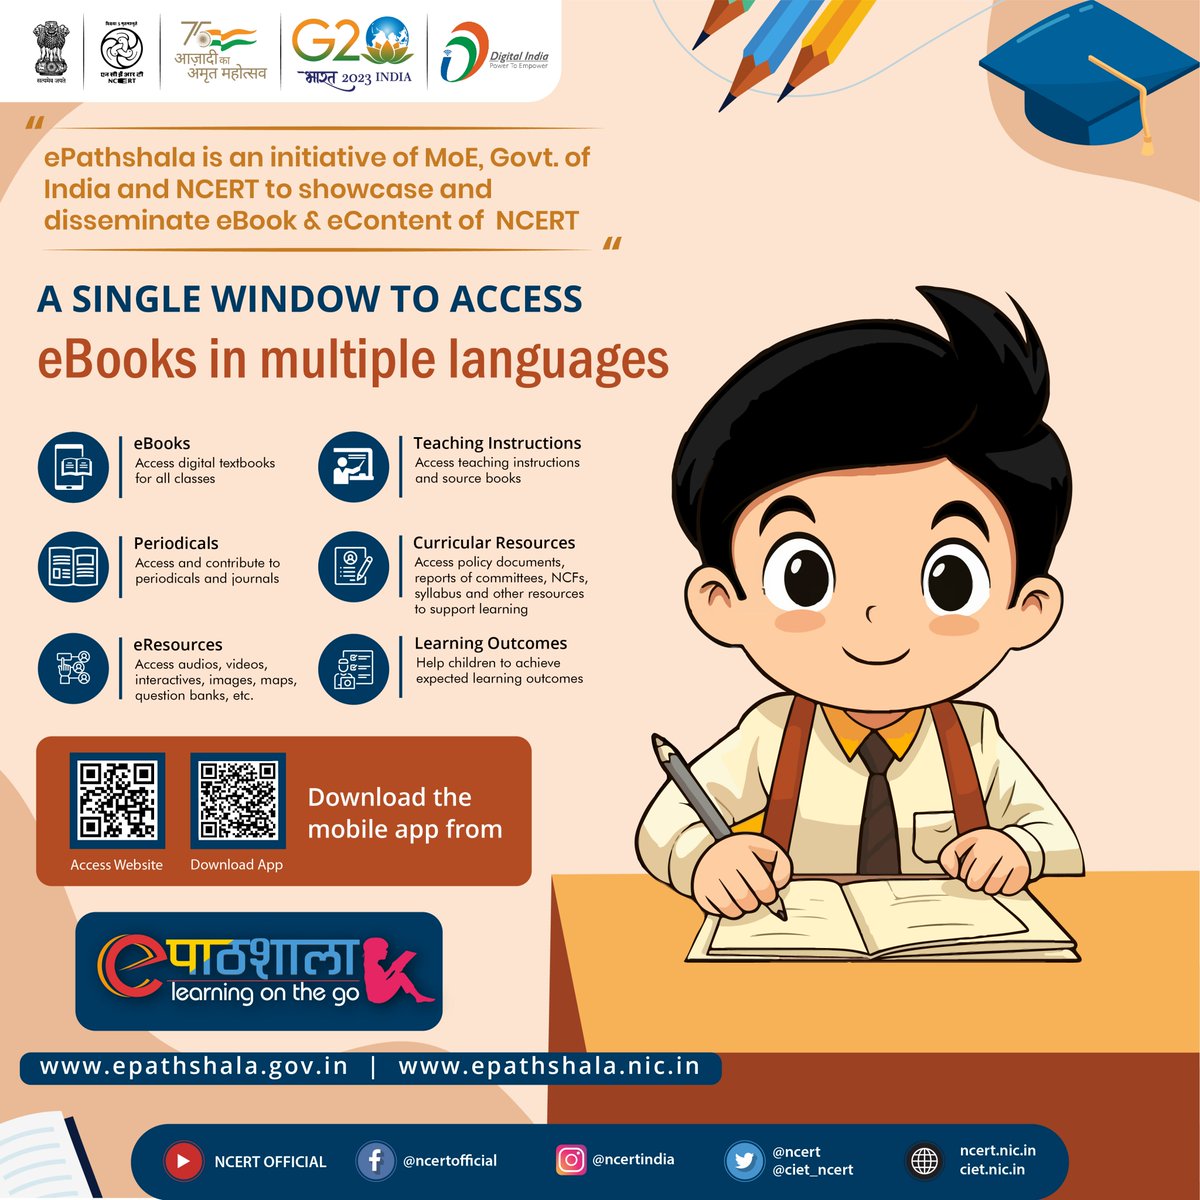 Under the aegis of Ministry of Education, Govt. of India, the NCERT brings to you an initiative, e-Pathshala, wherein you have free access to ebooks and e-resources - texts, audios, videos etc. Join the ePathshala community and begin digital learning journey like never before!